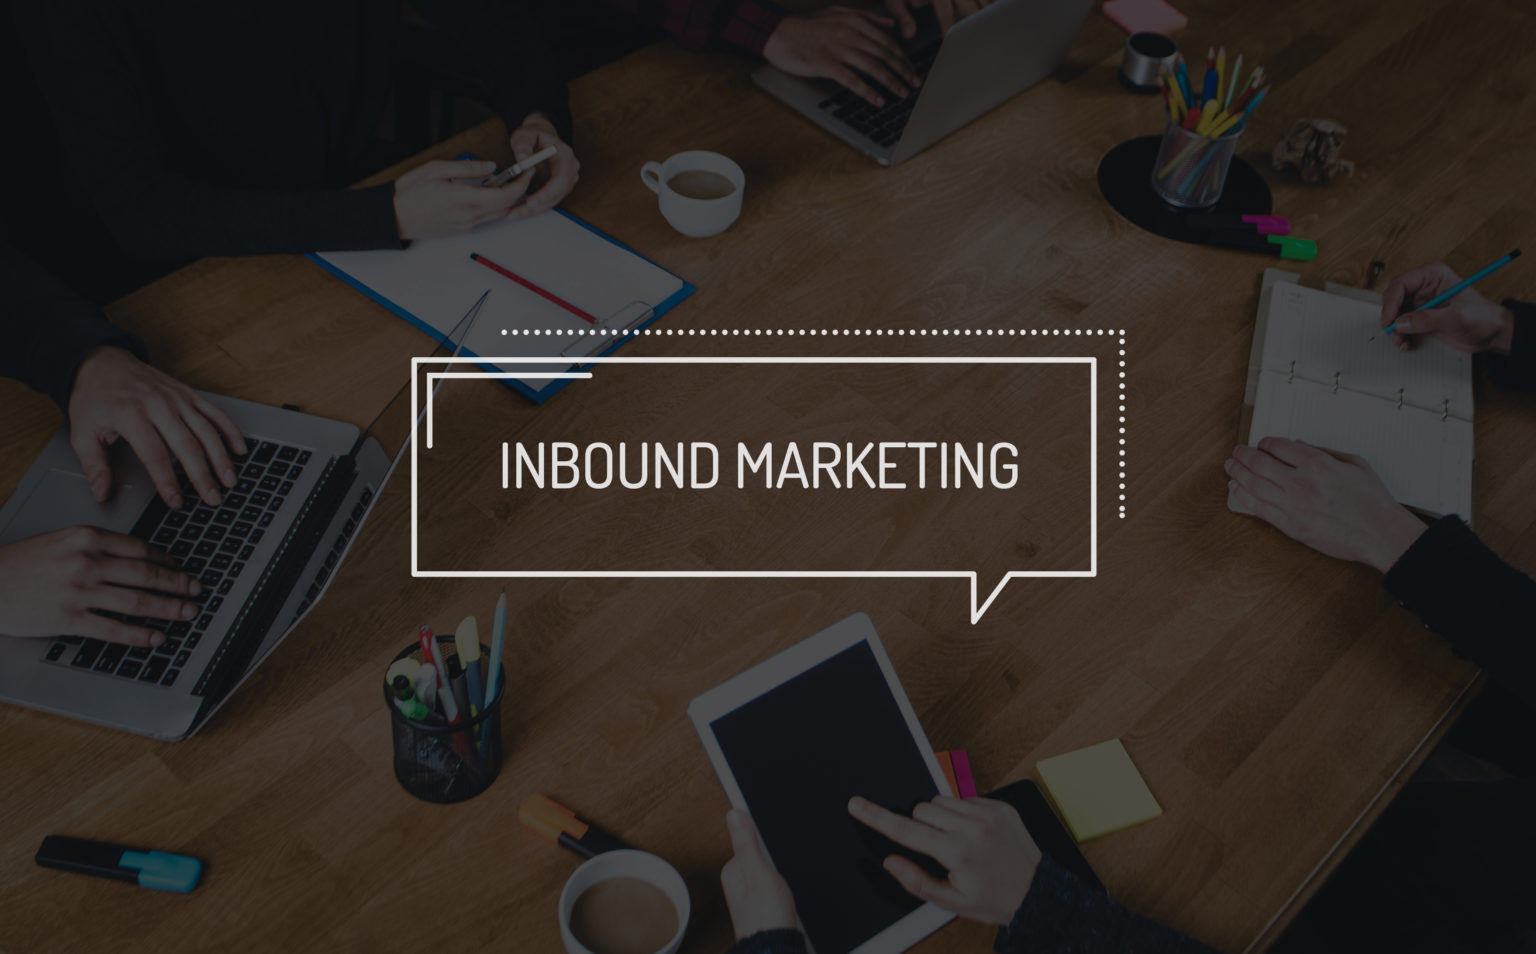 Inbound Marketing: Digital Marketing in the Travel and Tourism Industry